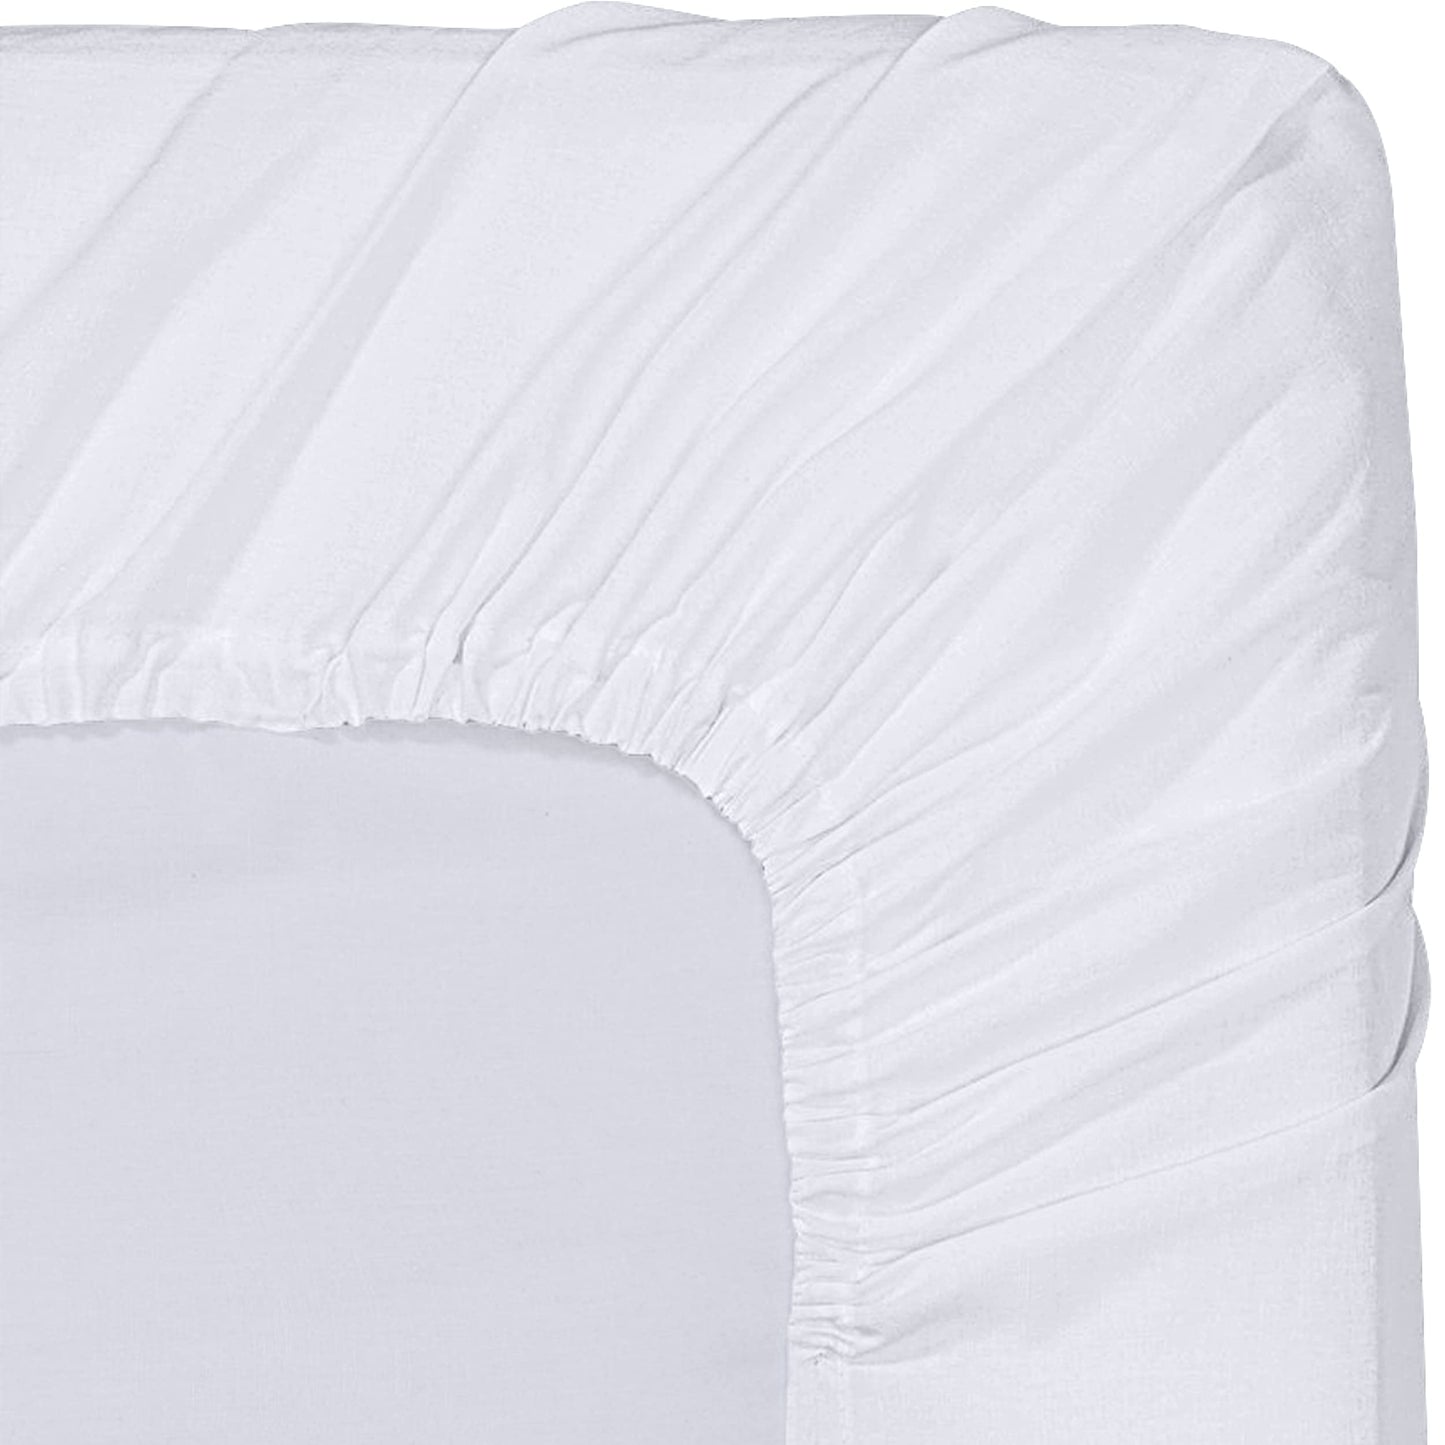 Utopia Bedding King Fitted Sheet - Bottom Sheet - Deep Pocket - Soft Microfiber -Shrinkage and Fade Resistant-Easy Care -1 Fitted Sheet Only (White)